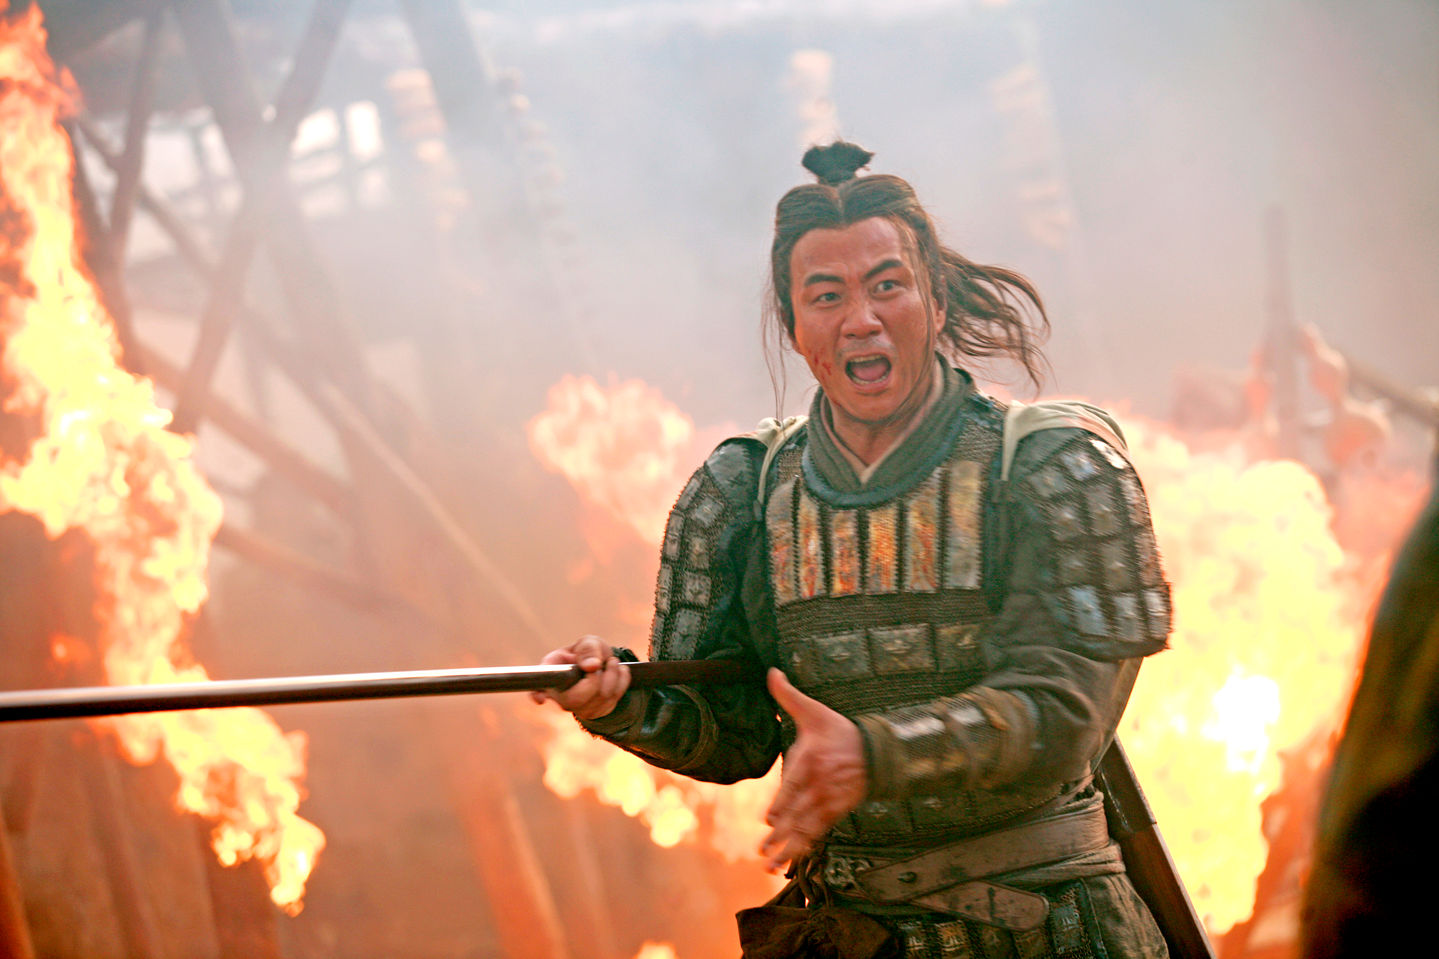 Hu Jun stars as Zhao Yun in Magnolia Pictures' Red Cliff (2009)